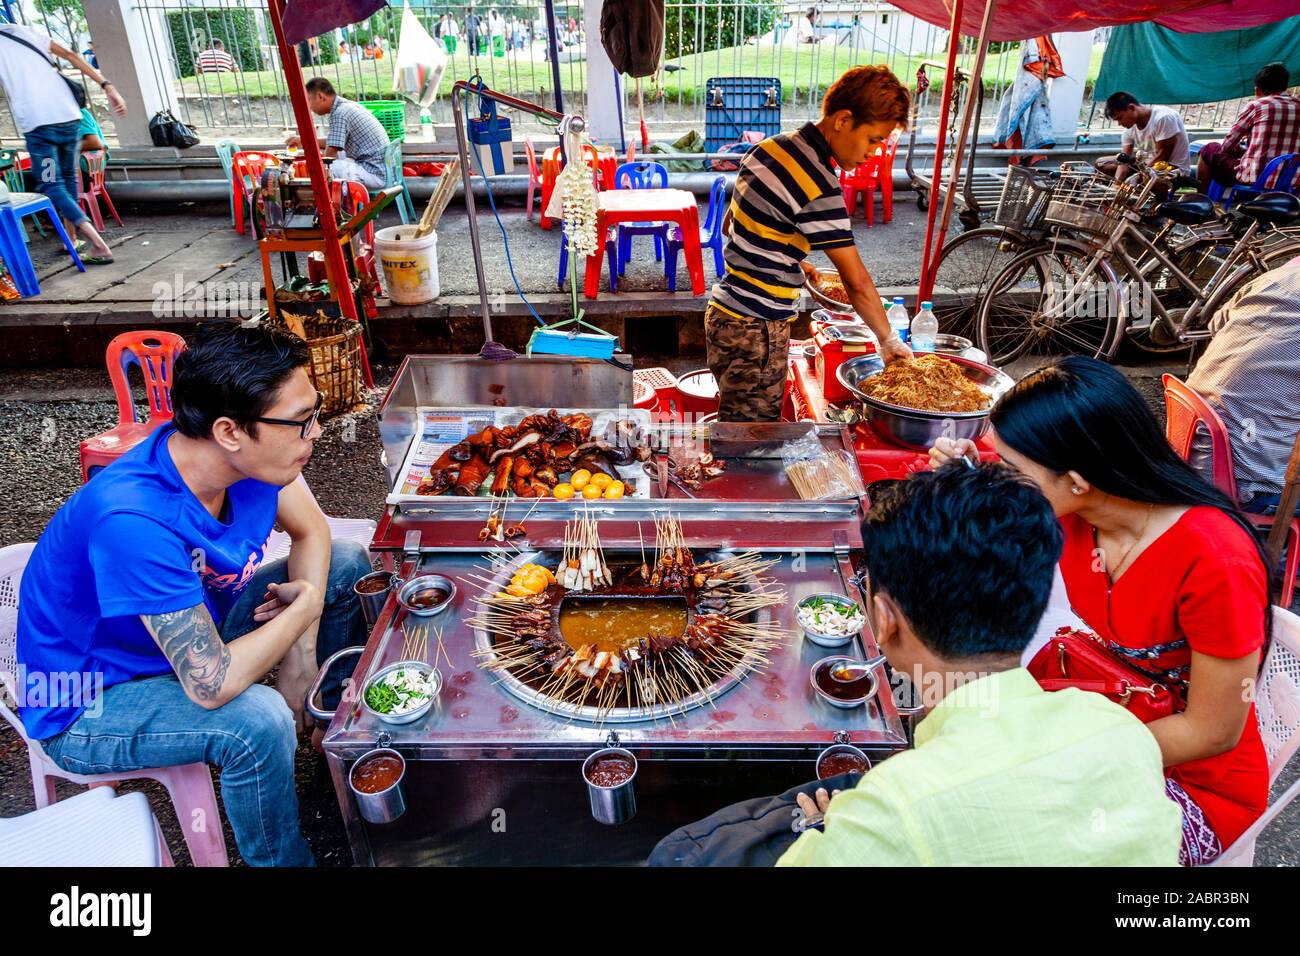 A Group Of Young People Eating Street Food From A Stall In Downtown Yangon, Yangon, Myanmar. Stock Photo